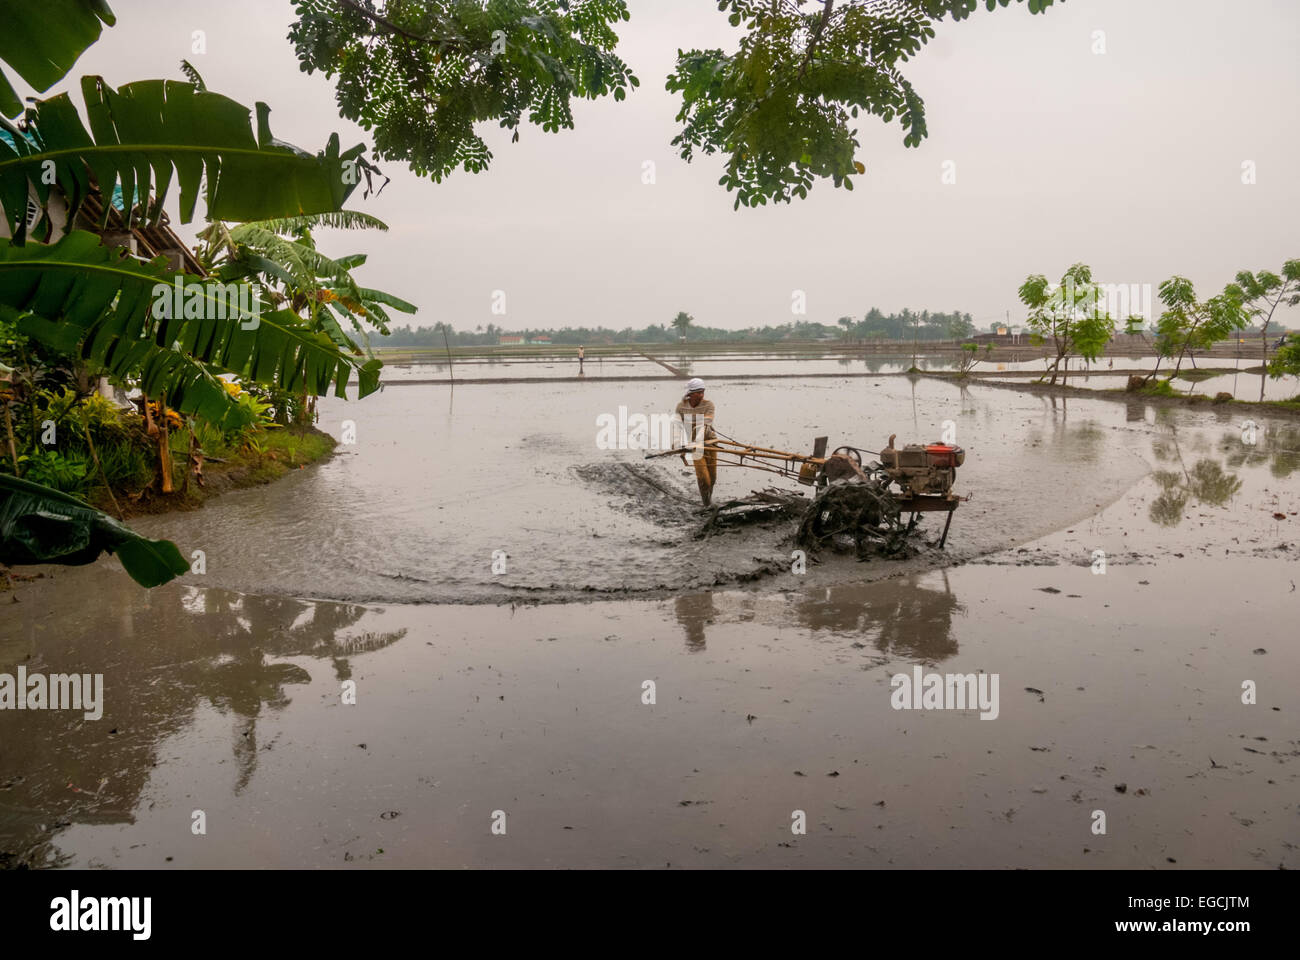 A farmer plowing before sowing, on a rice field flooded by rainwater during rainy season in Karawang, West Java, Indonesia. Stock Photo